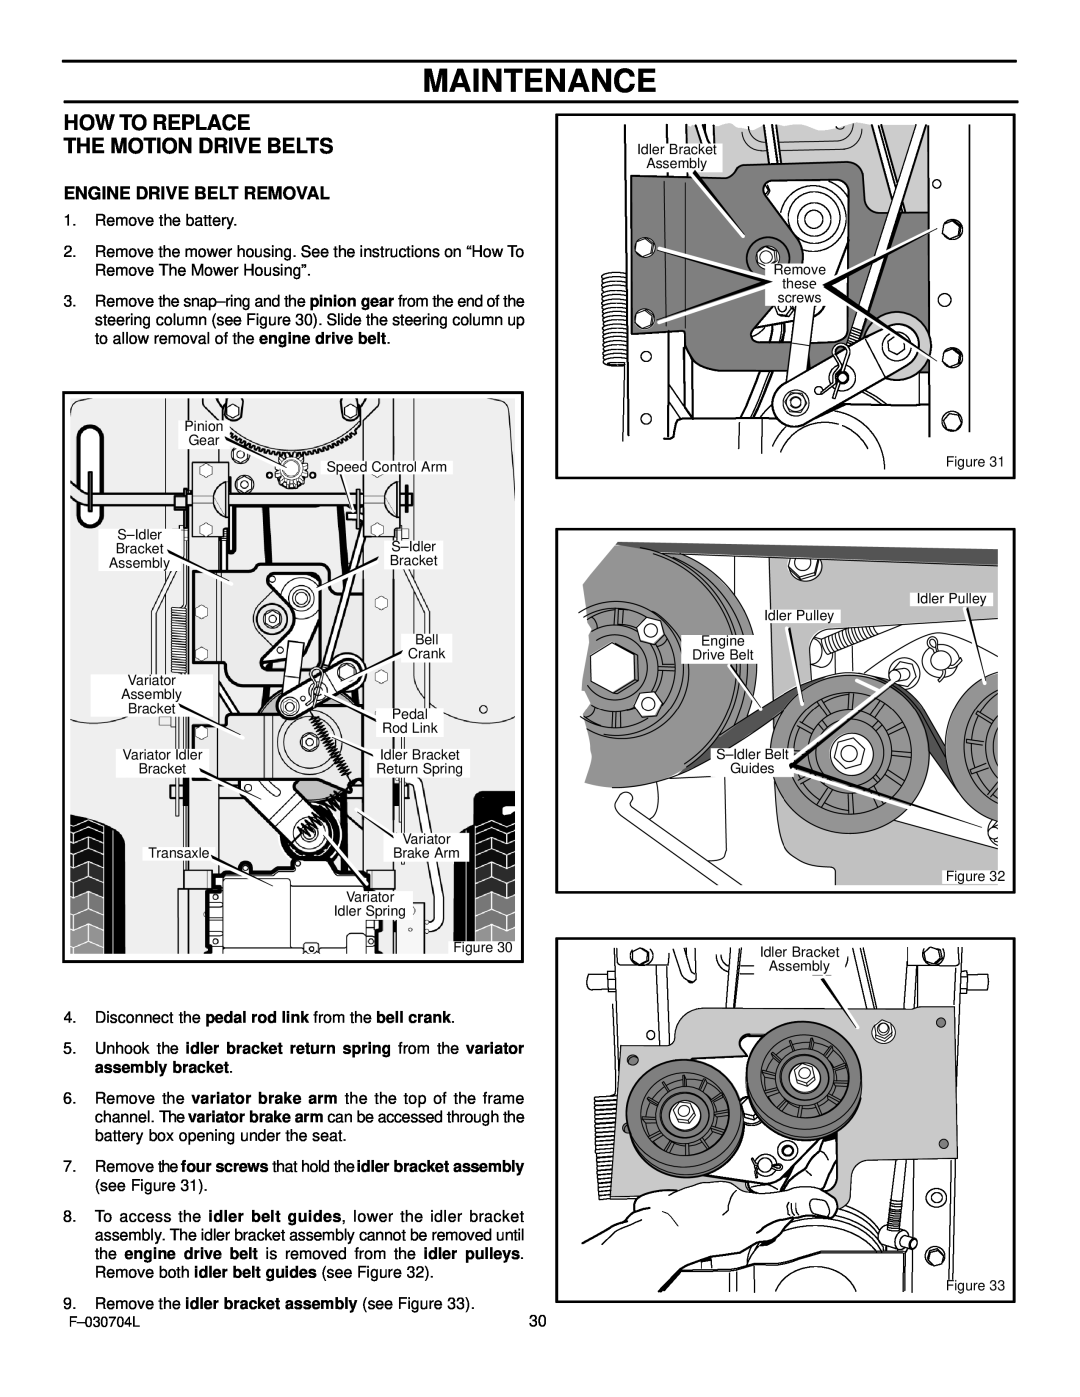 Murray 425303x92B manual Maintenance, How To Replace The Motion Drive Belts, Engine Drive Belt Removal 